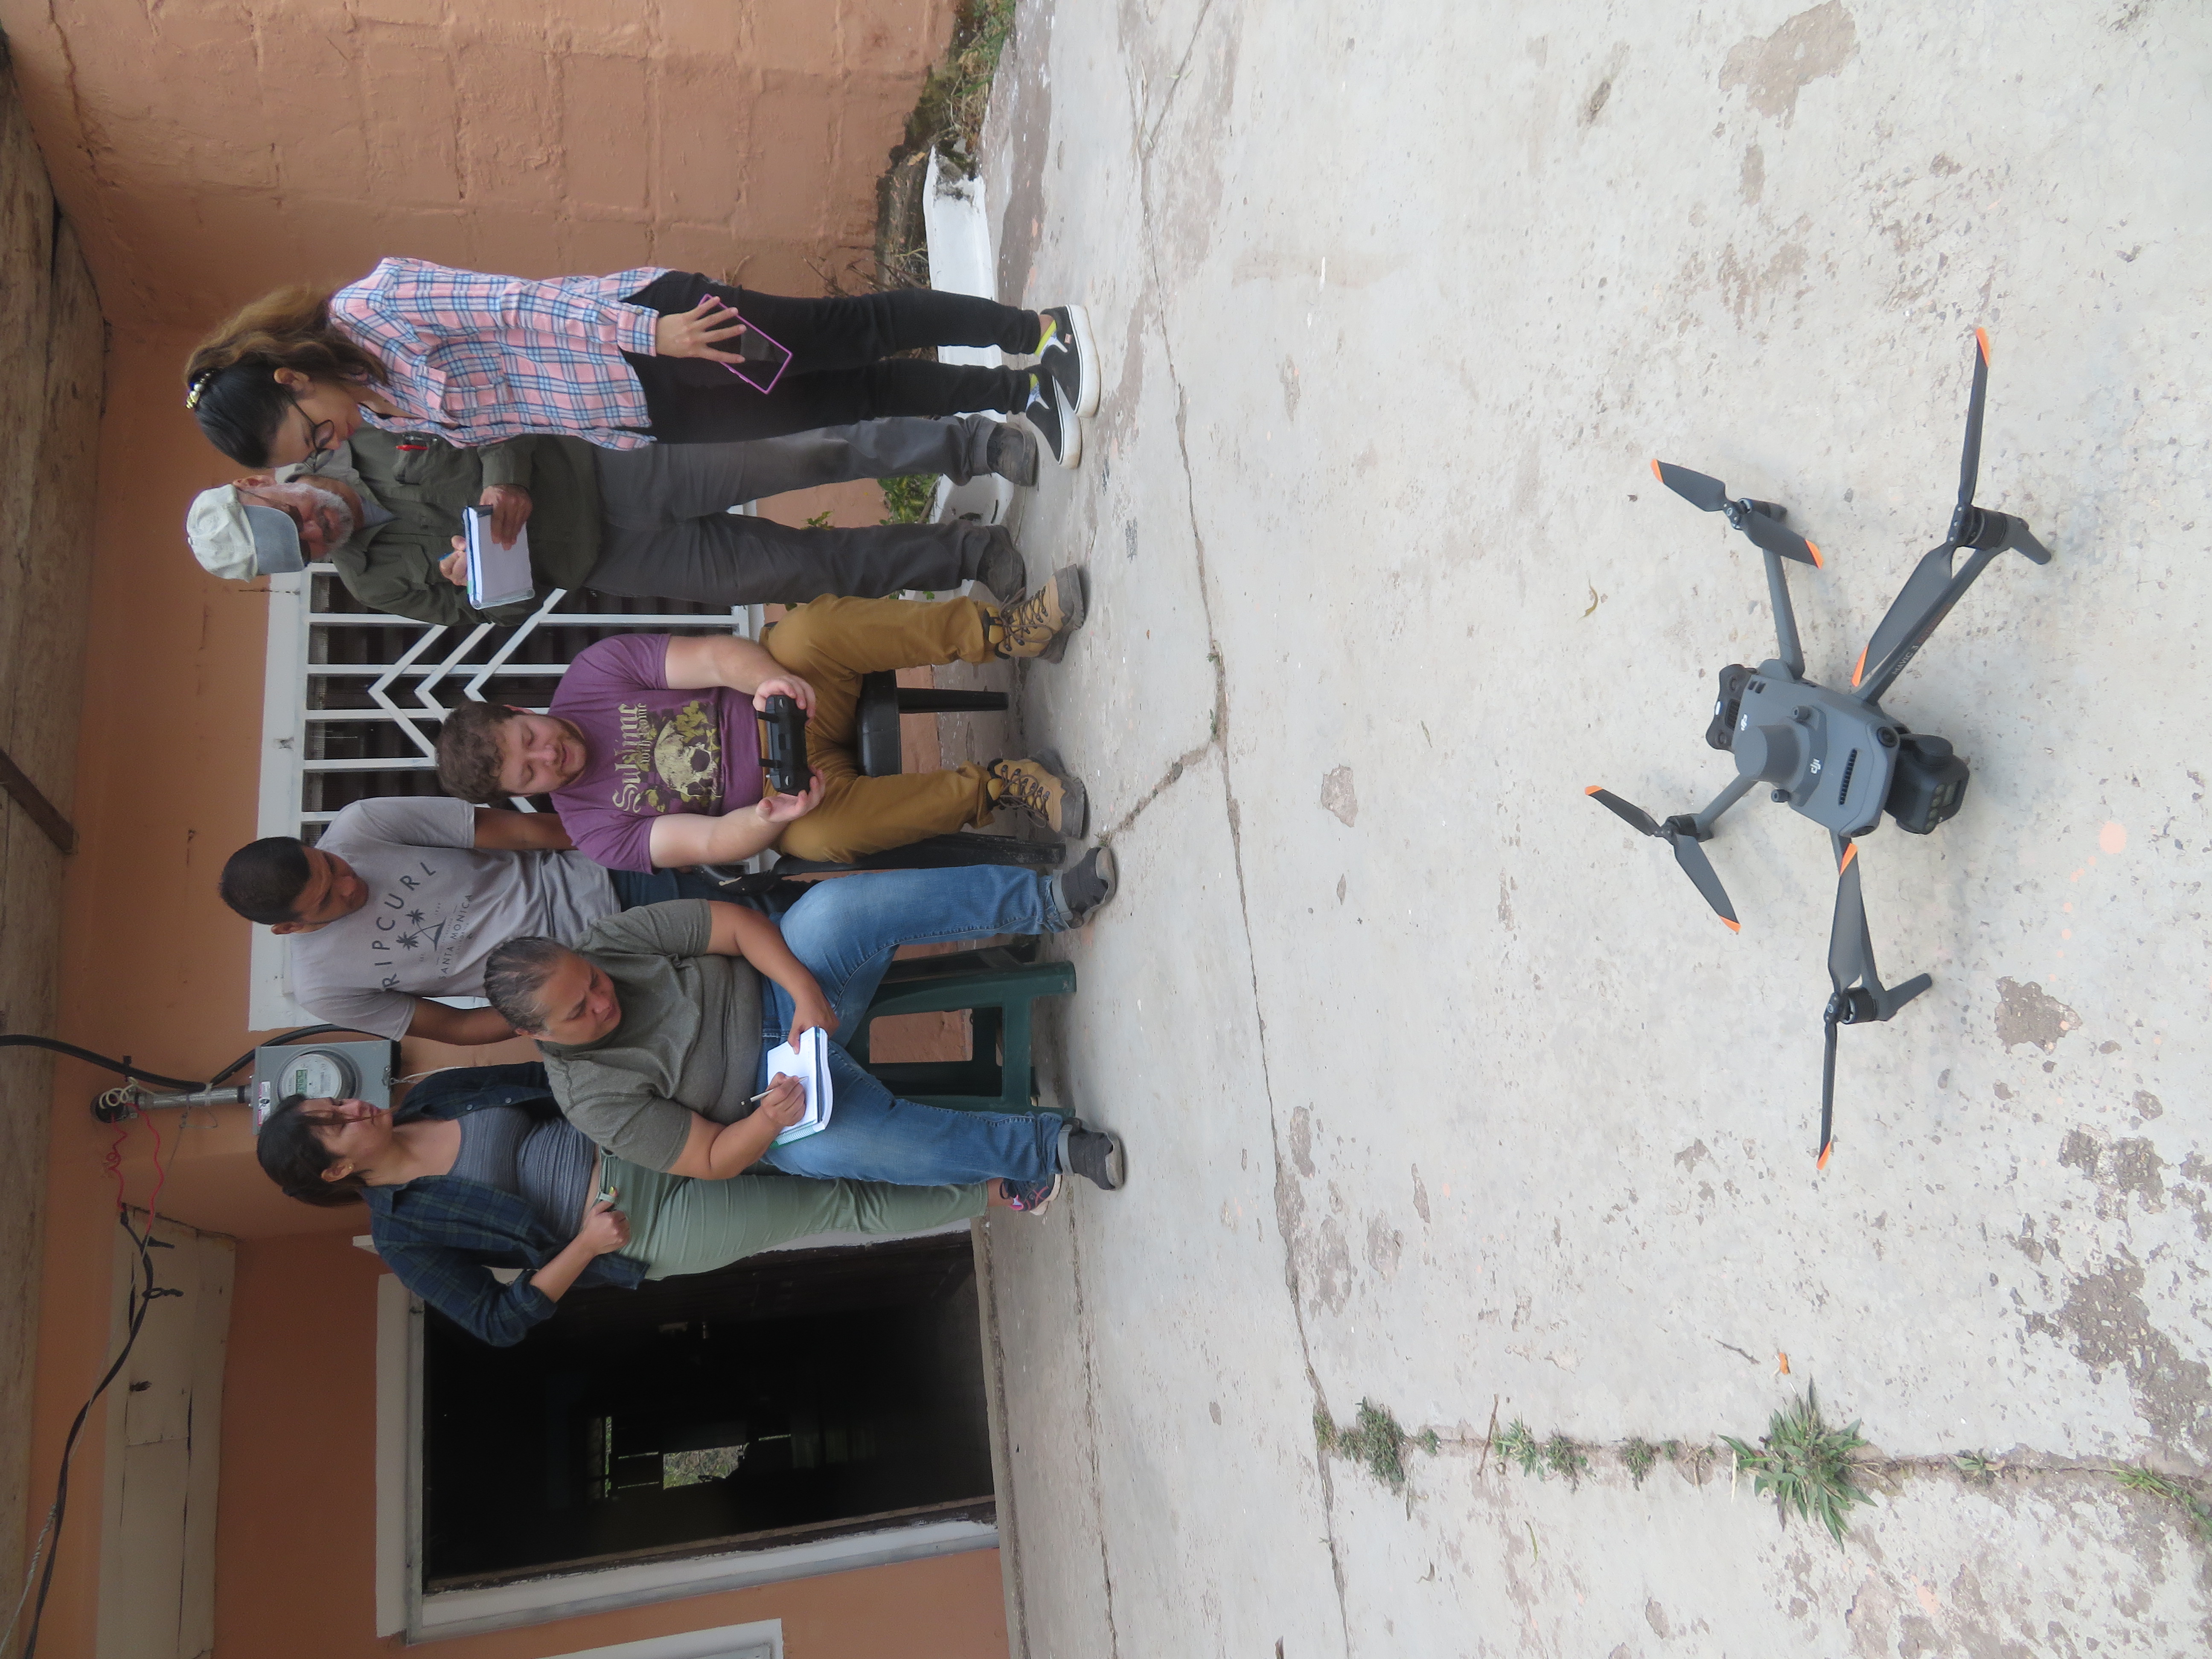 Danny teaching trainees how to fly the drone